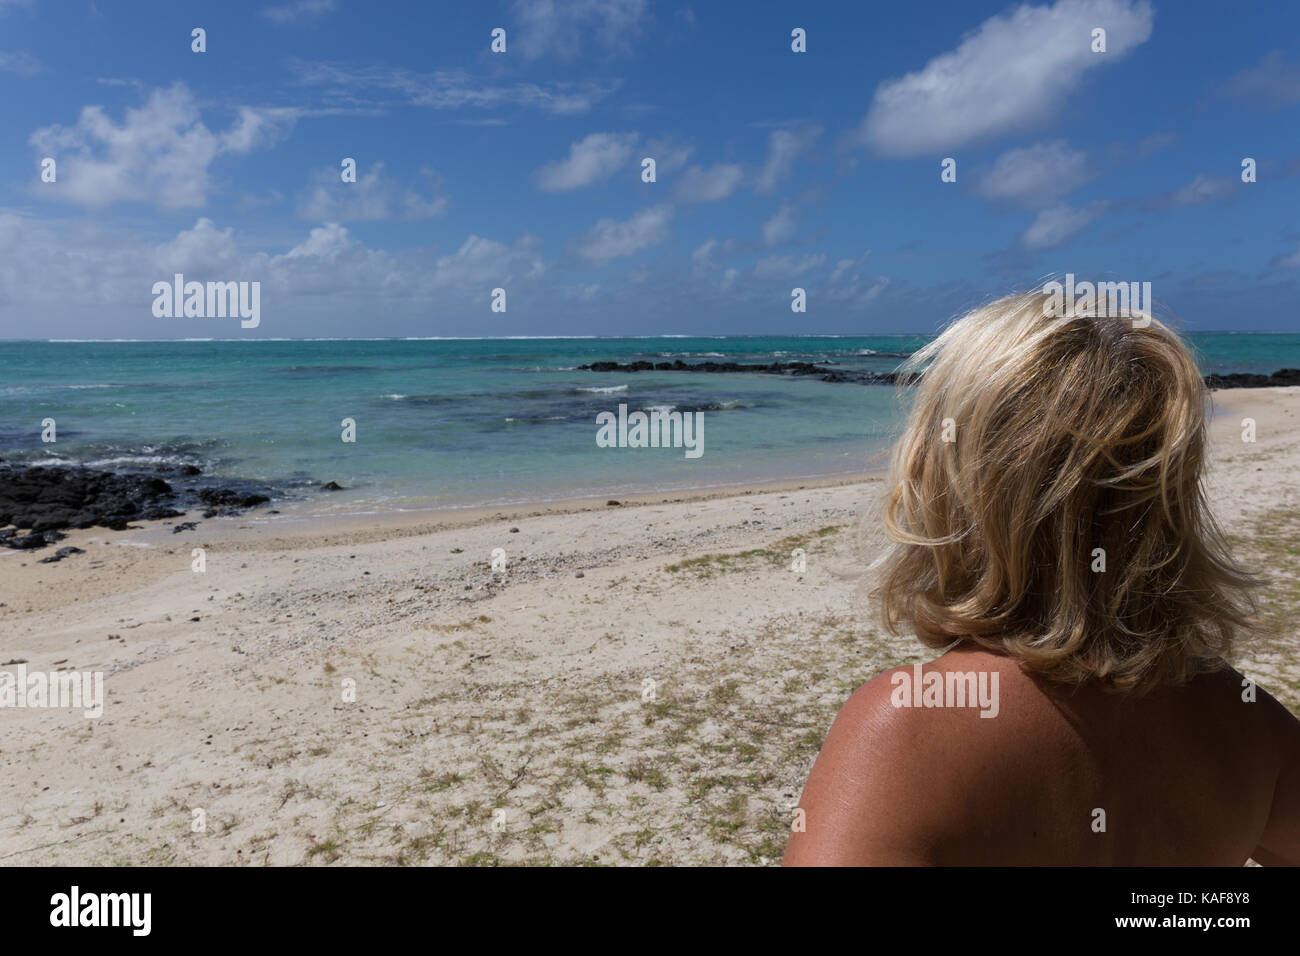 Blonde woman looking at the sea in Mauritius Stock Photo